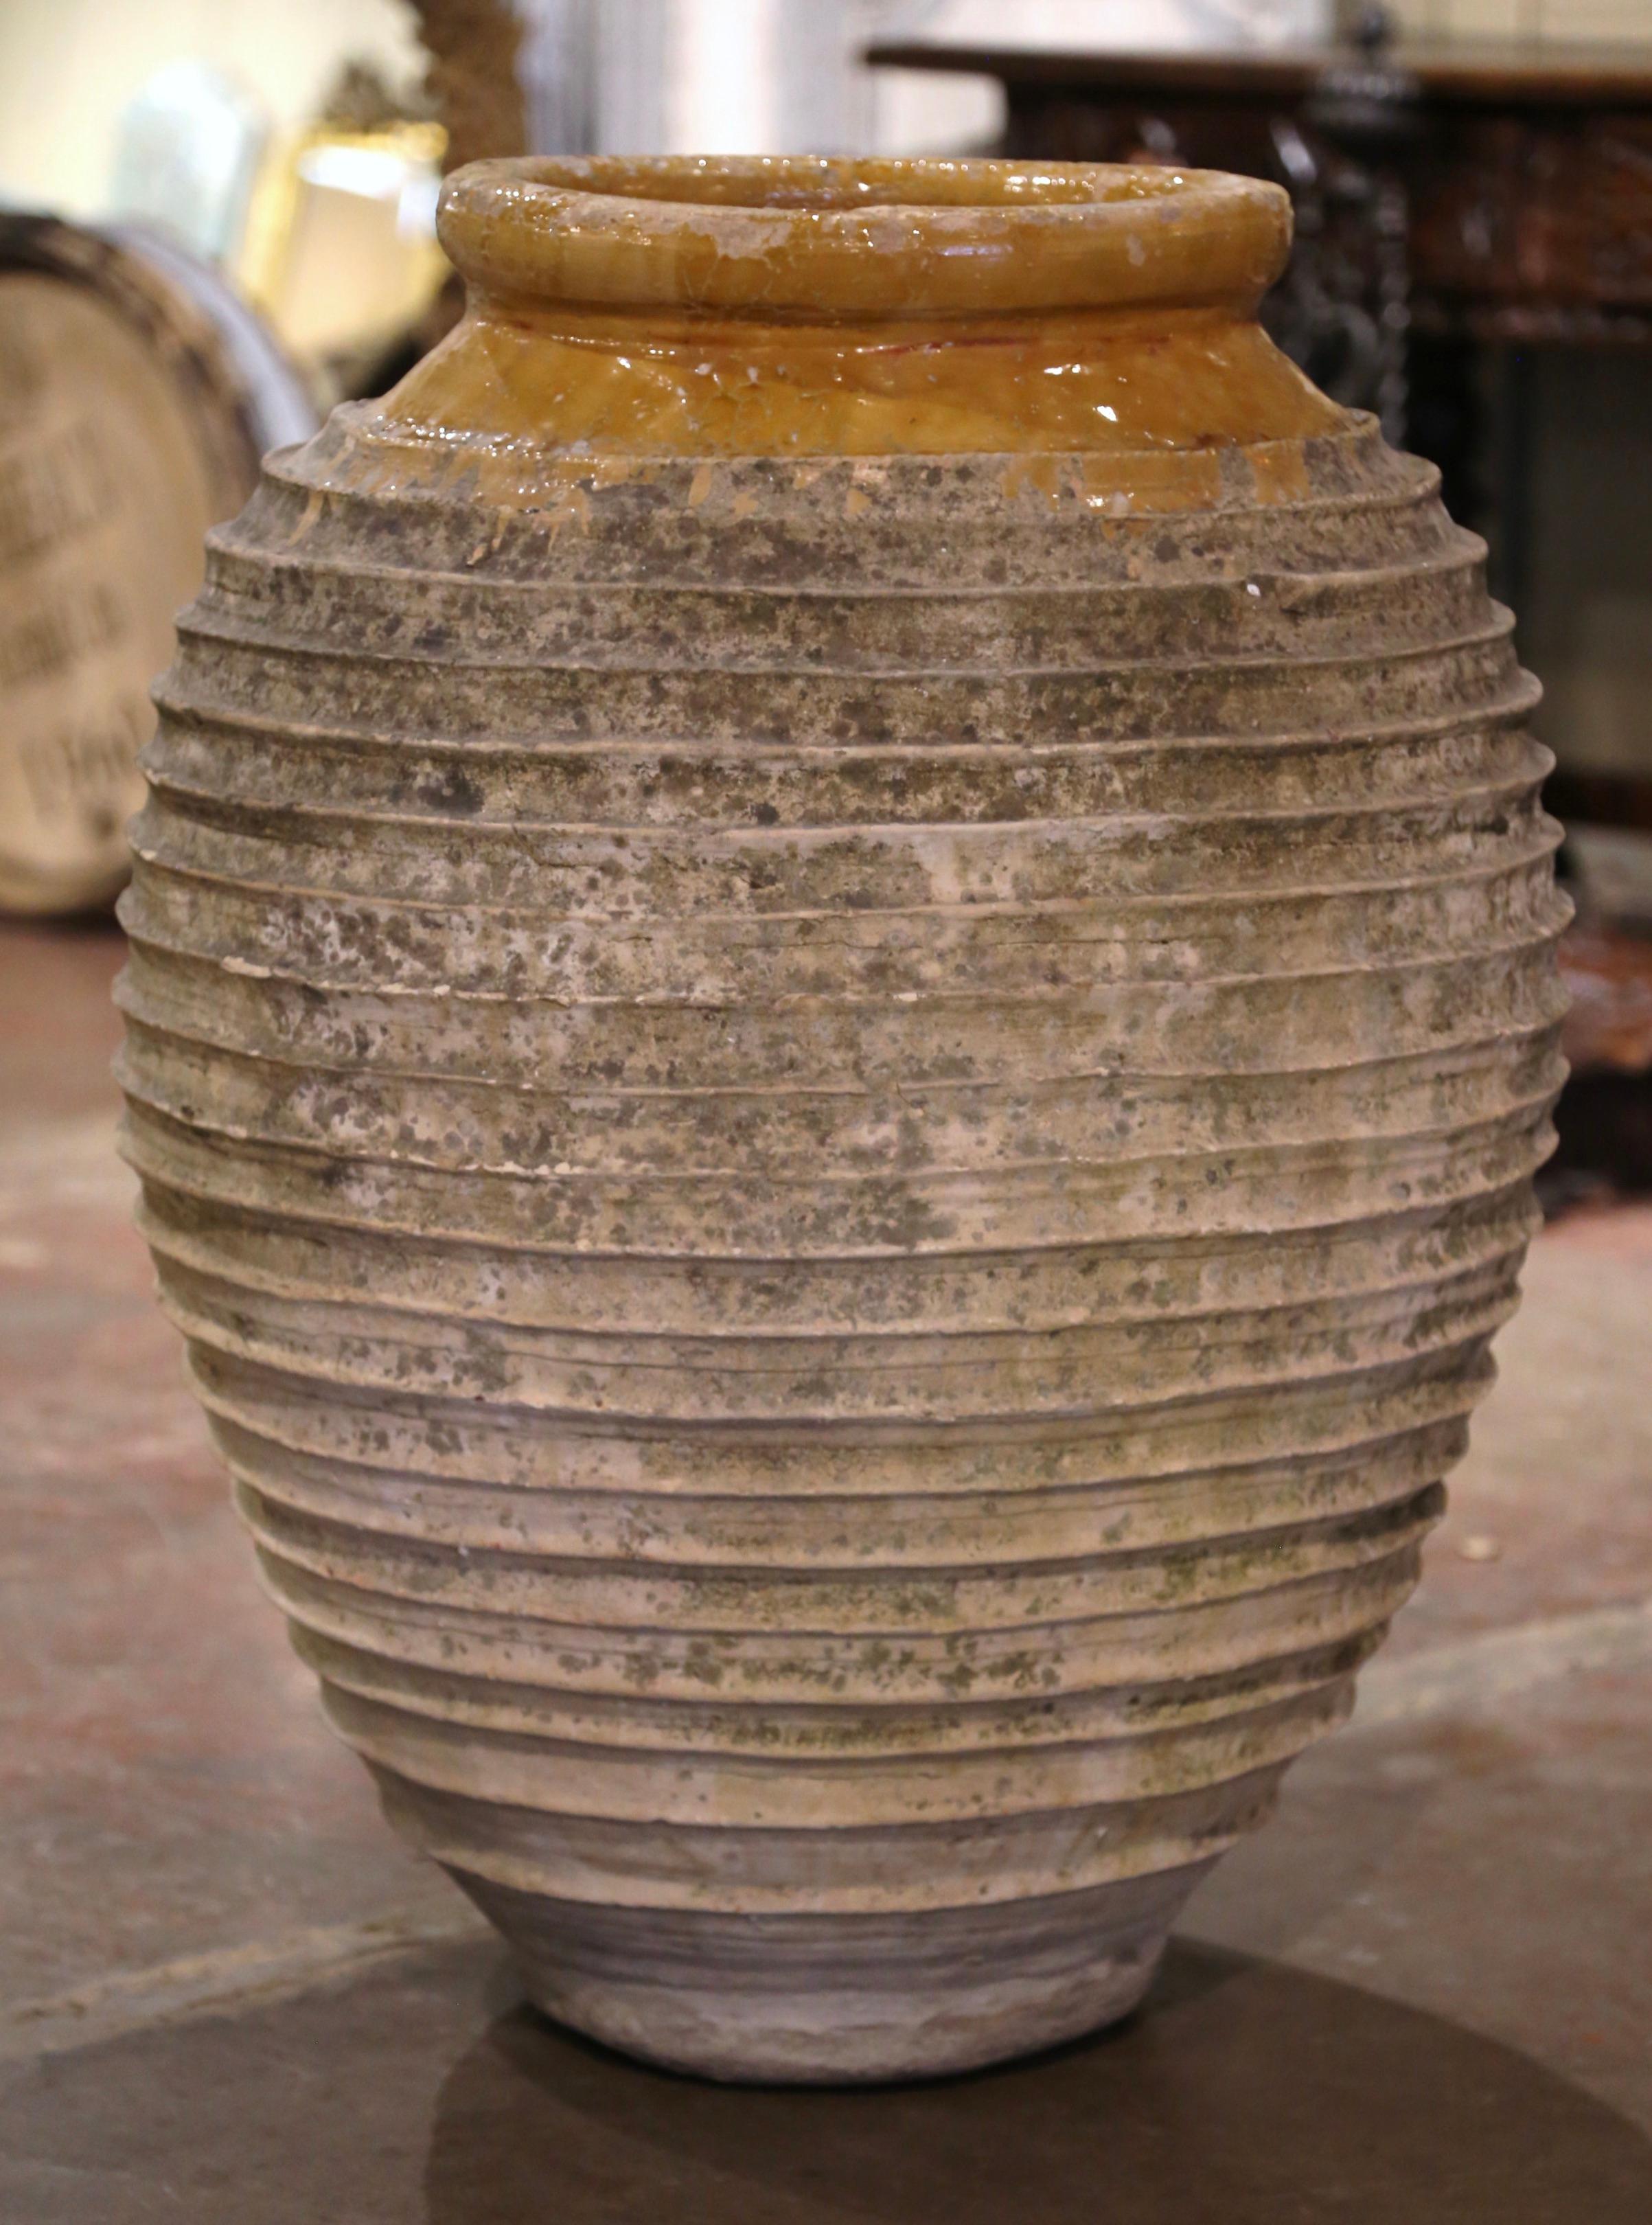  Mid-19th Century Greek Patinated Terracotta Olive Jar with Mustard Glazed Neck In Excellent Condition For Sale In Dallas, TX